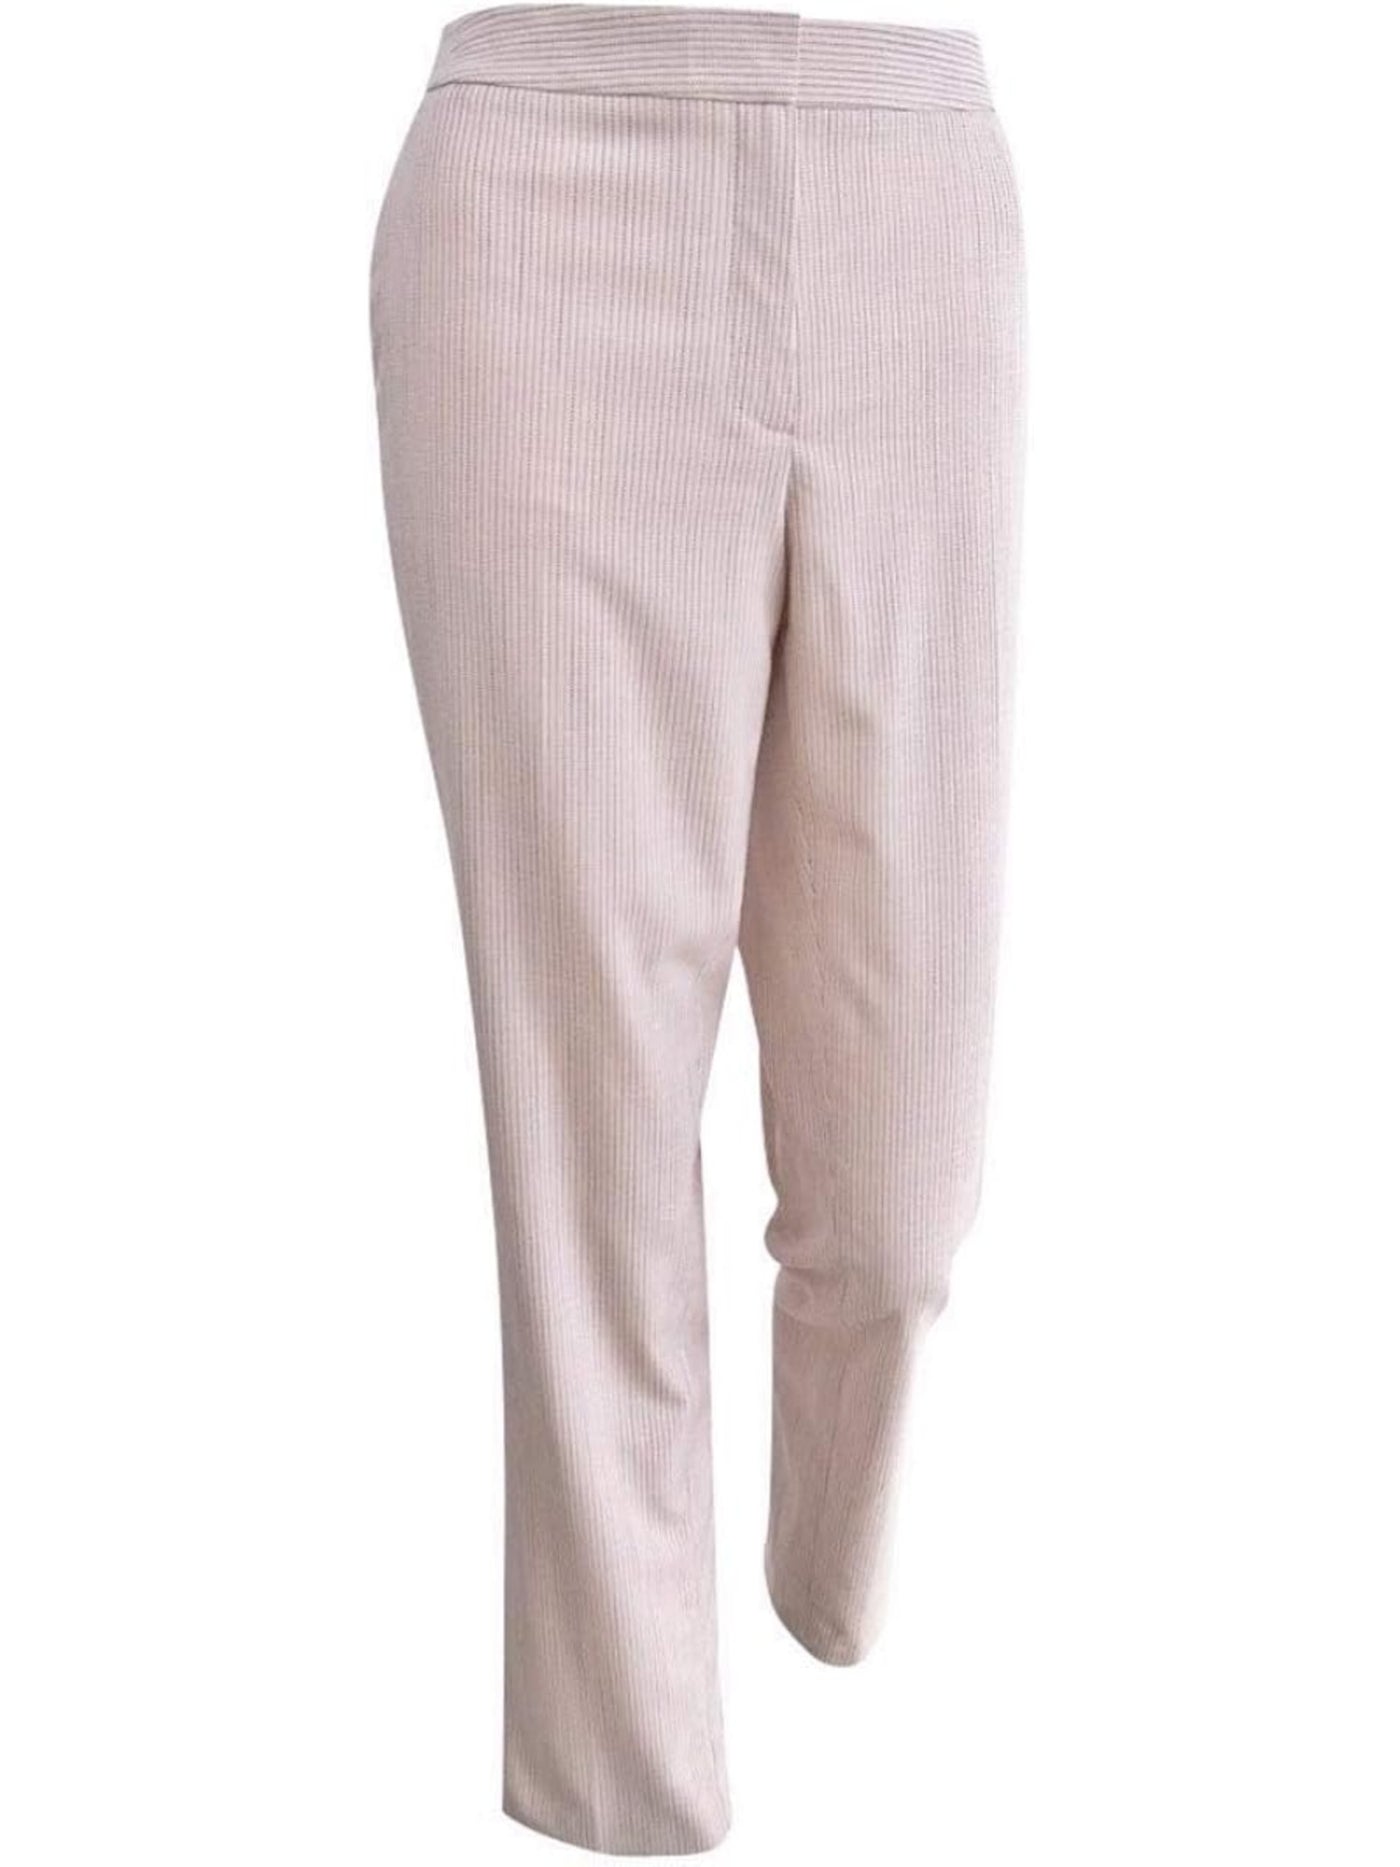 TOMMY HILFIGER Womens Pink Zippered Pocketed Slim Fit Pinstripe Wear To Work Straight leg Pants 16